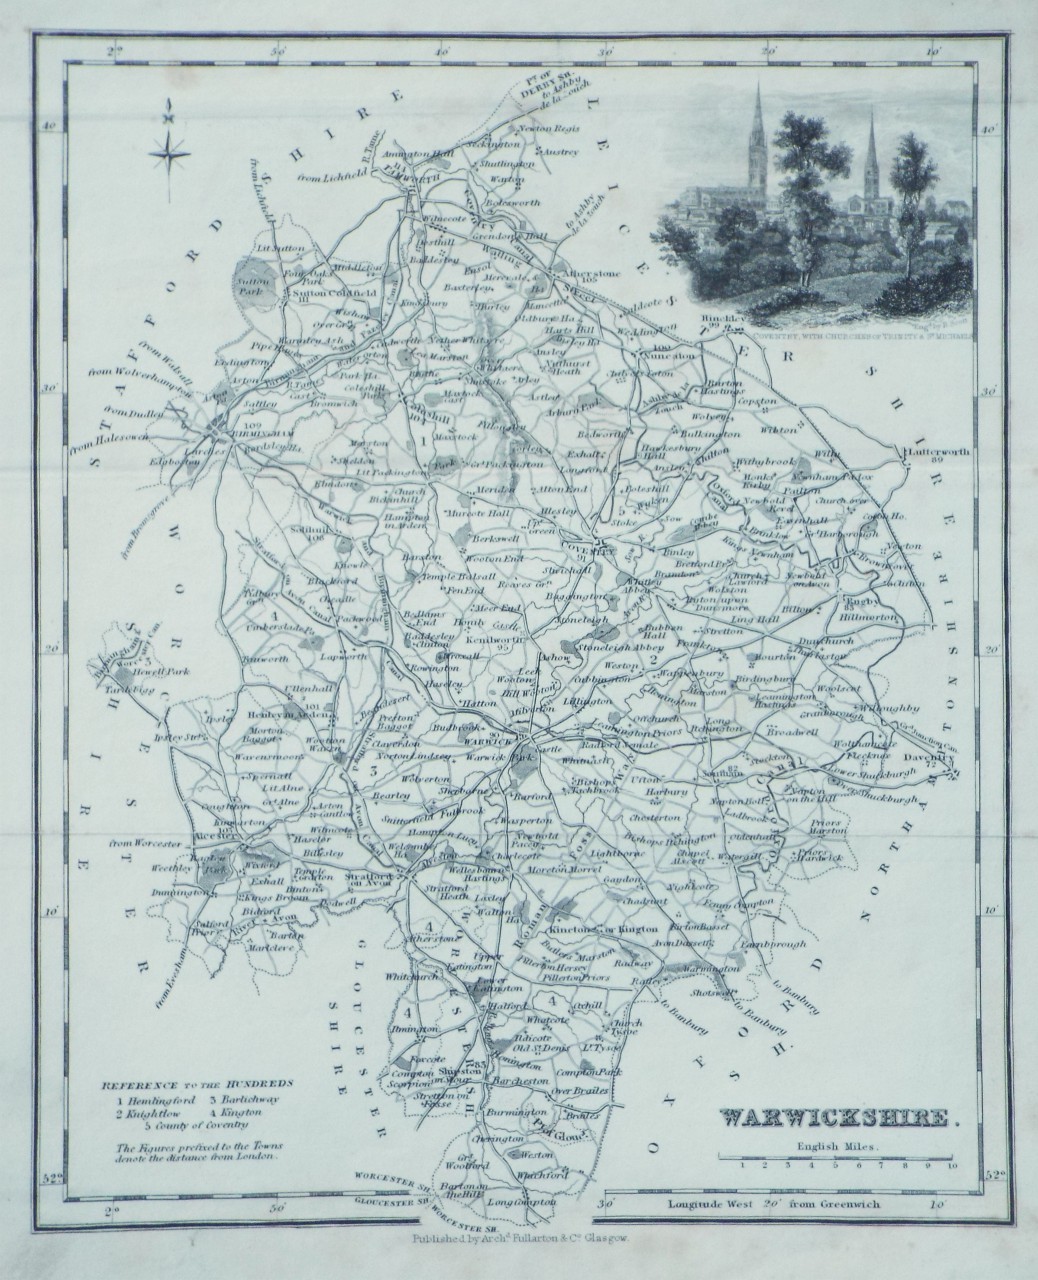 Map of Warwickshire - Coventry